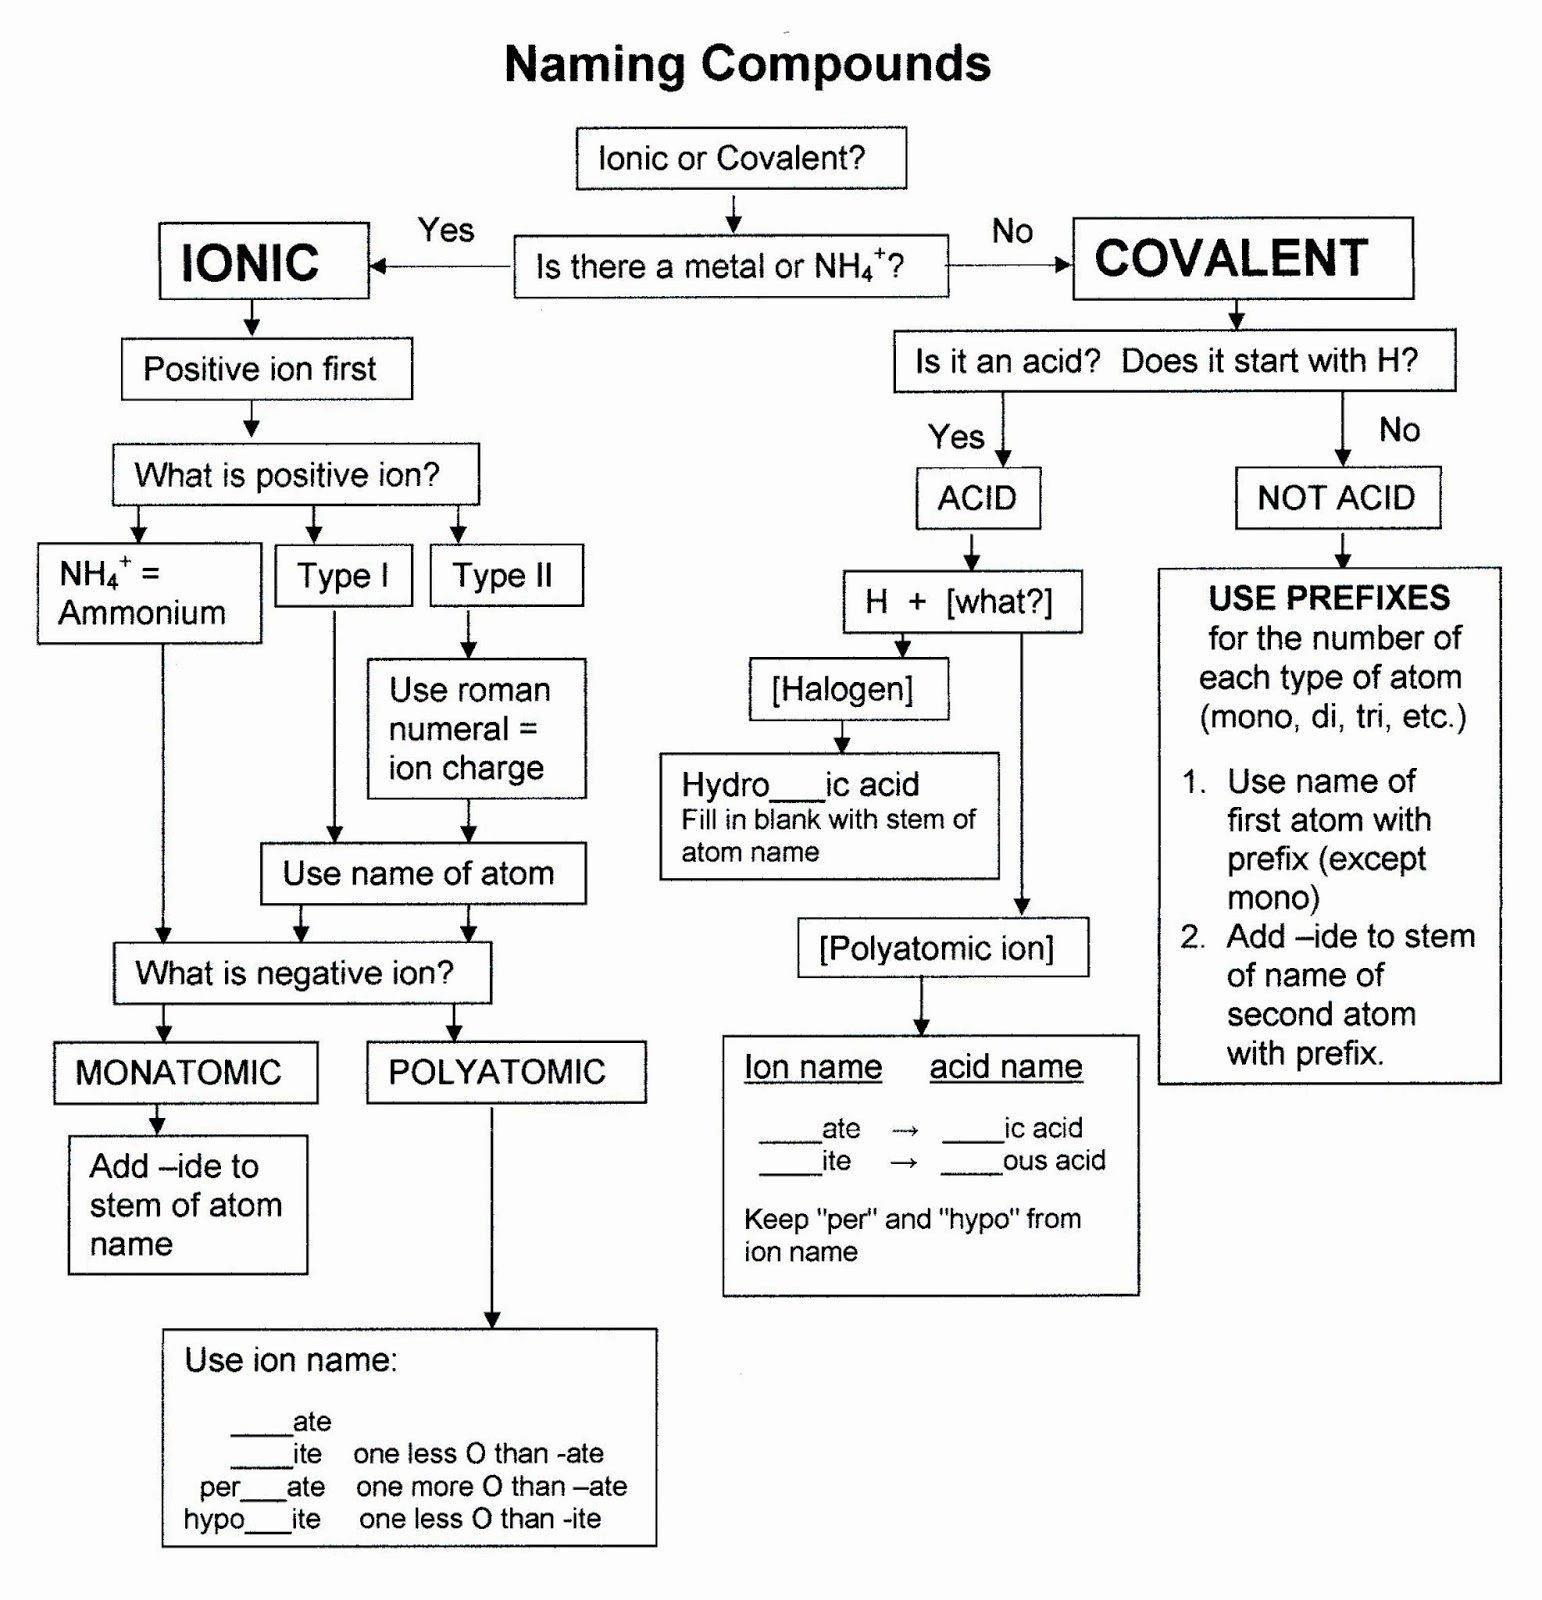 Compounds Names and formulas Worksheet Best Of Chemteam Chemical Nomenclature